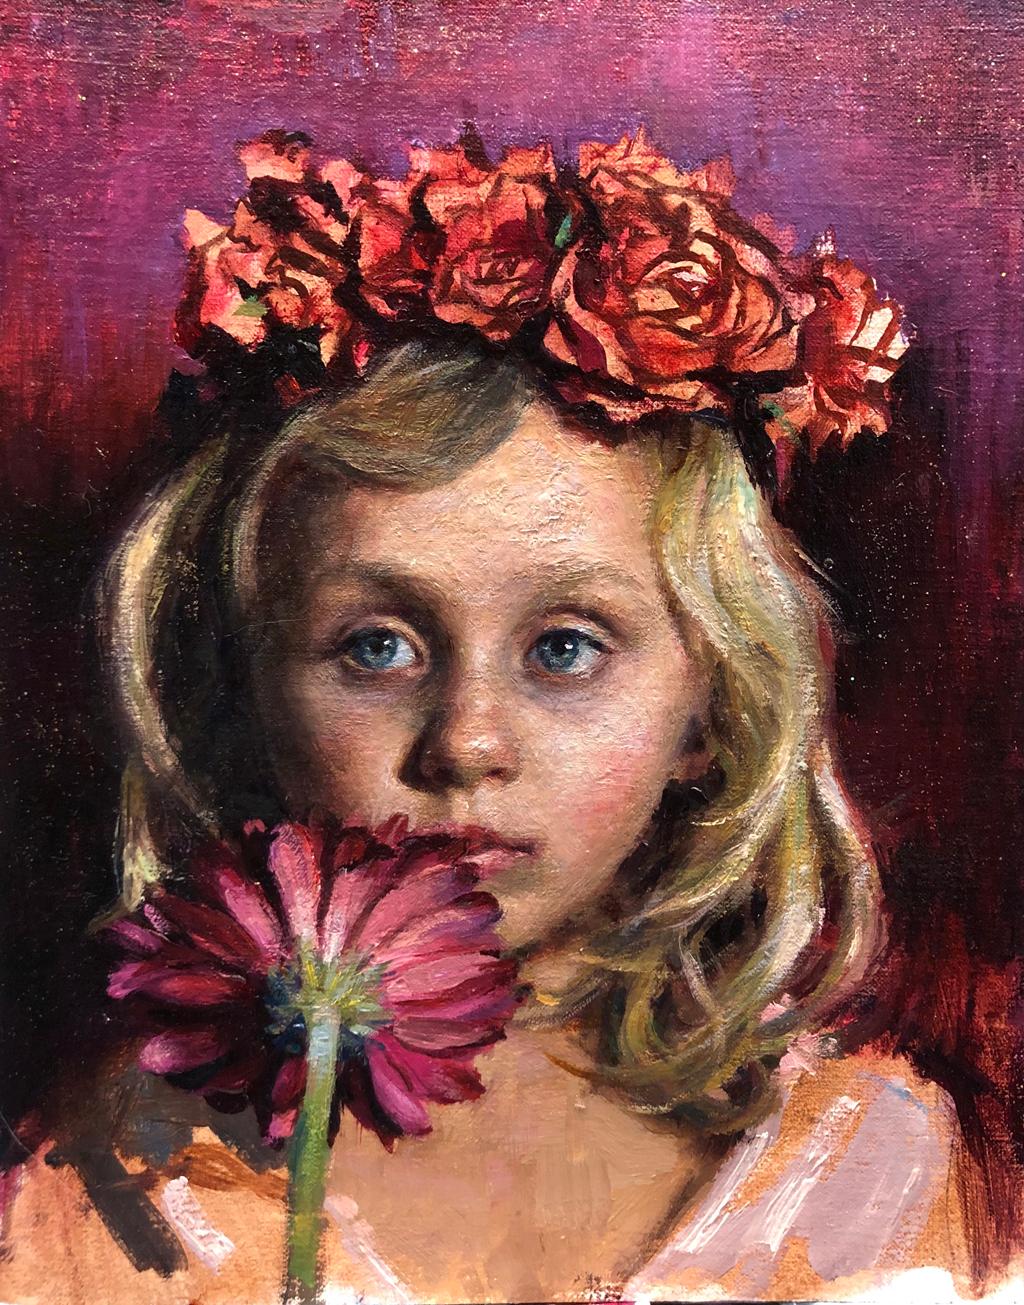 Flower Girl - Painting by Natalia Fabia